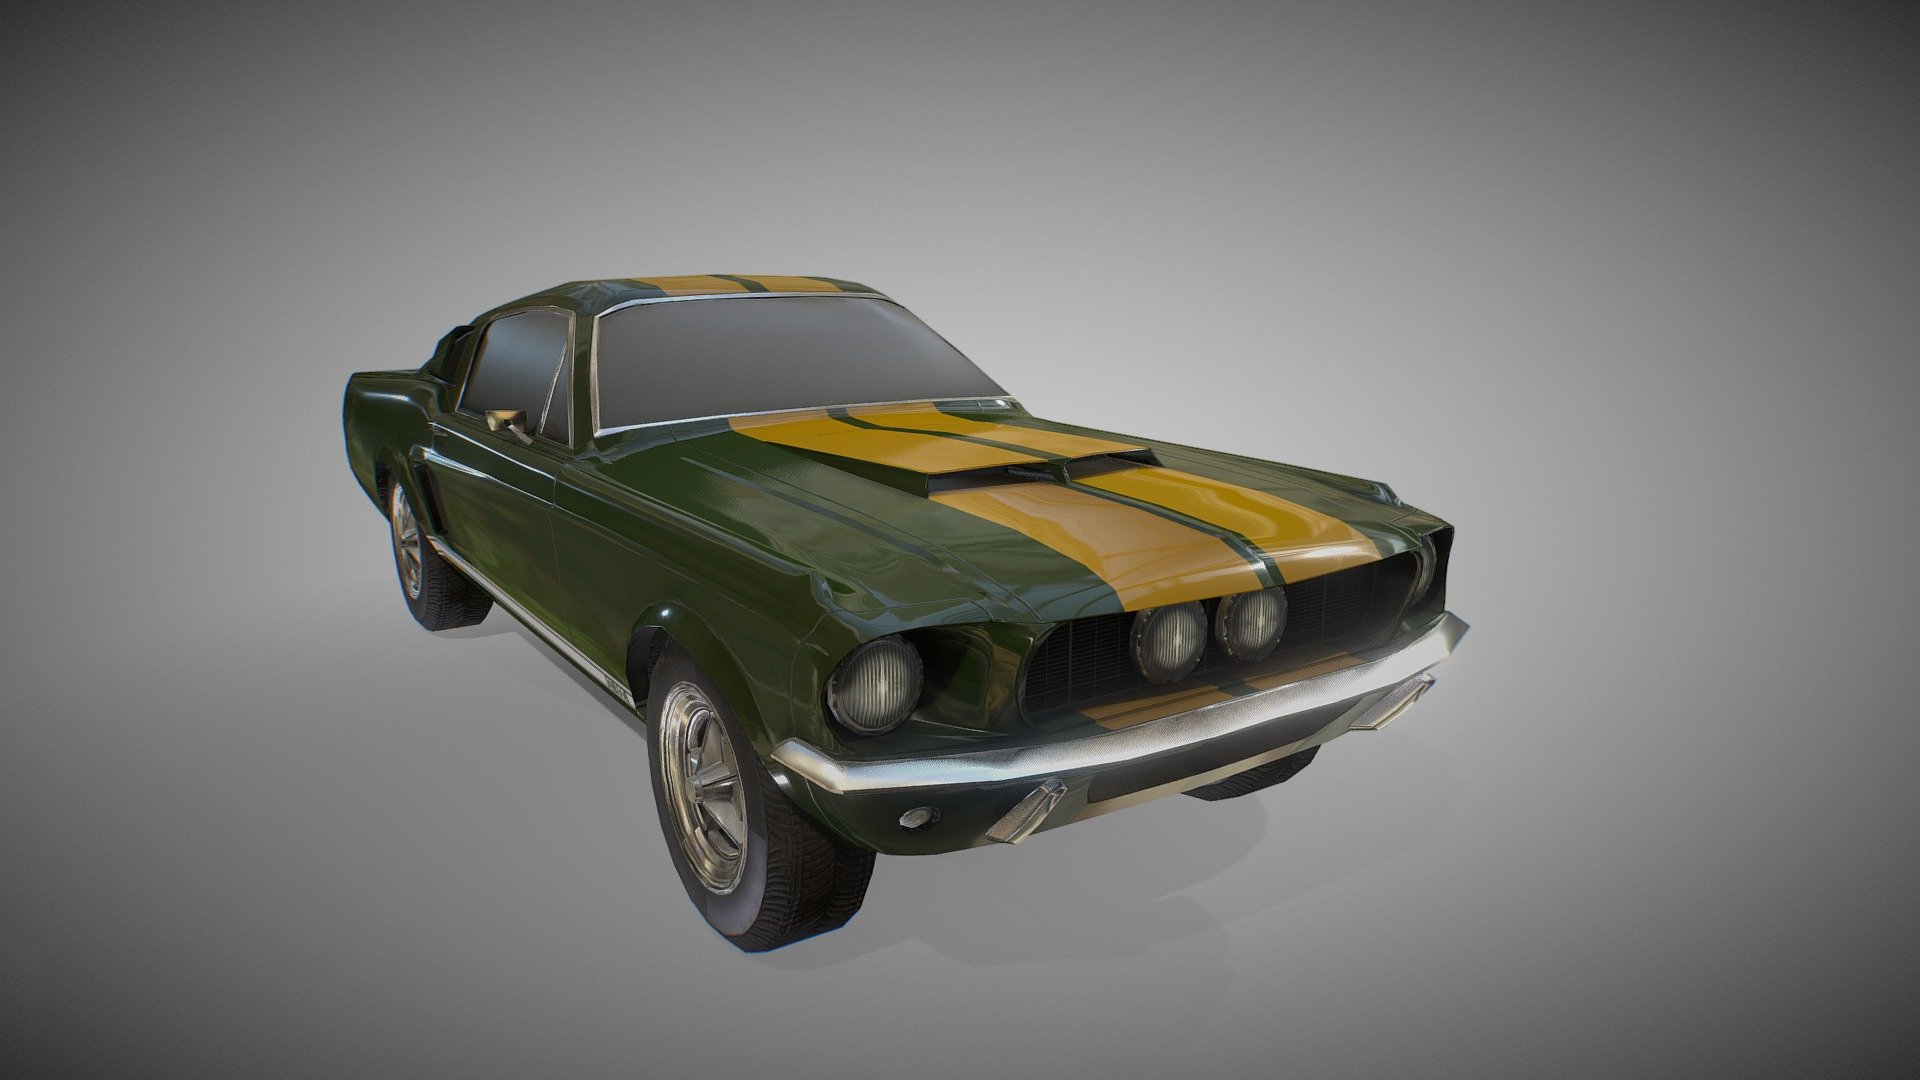 Game Asset
Low poly - Mustang Shelby GT 500 Year 1967 - Game Asset - 3D model by renepolichronov 3d model